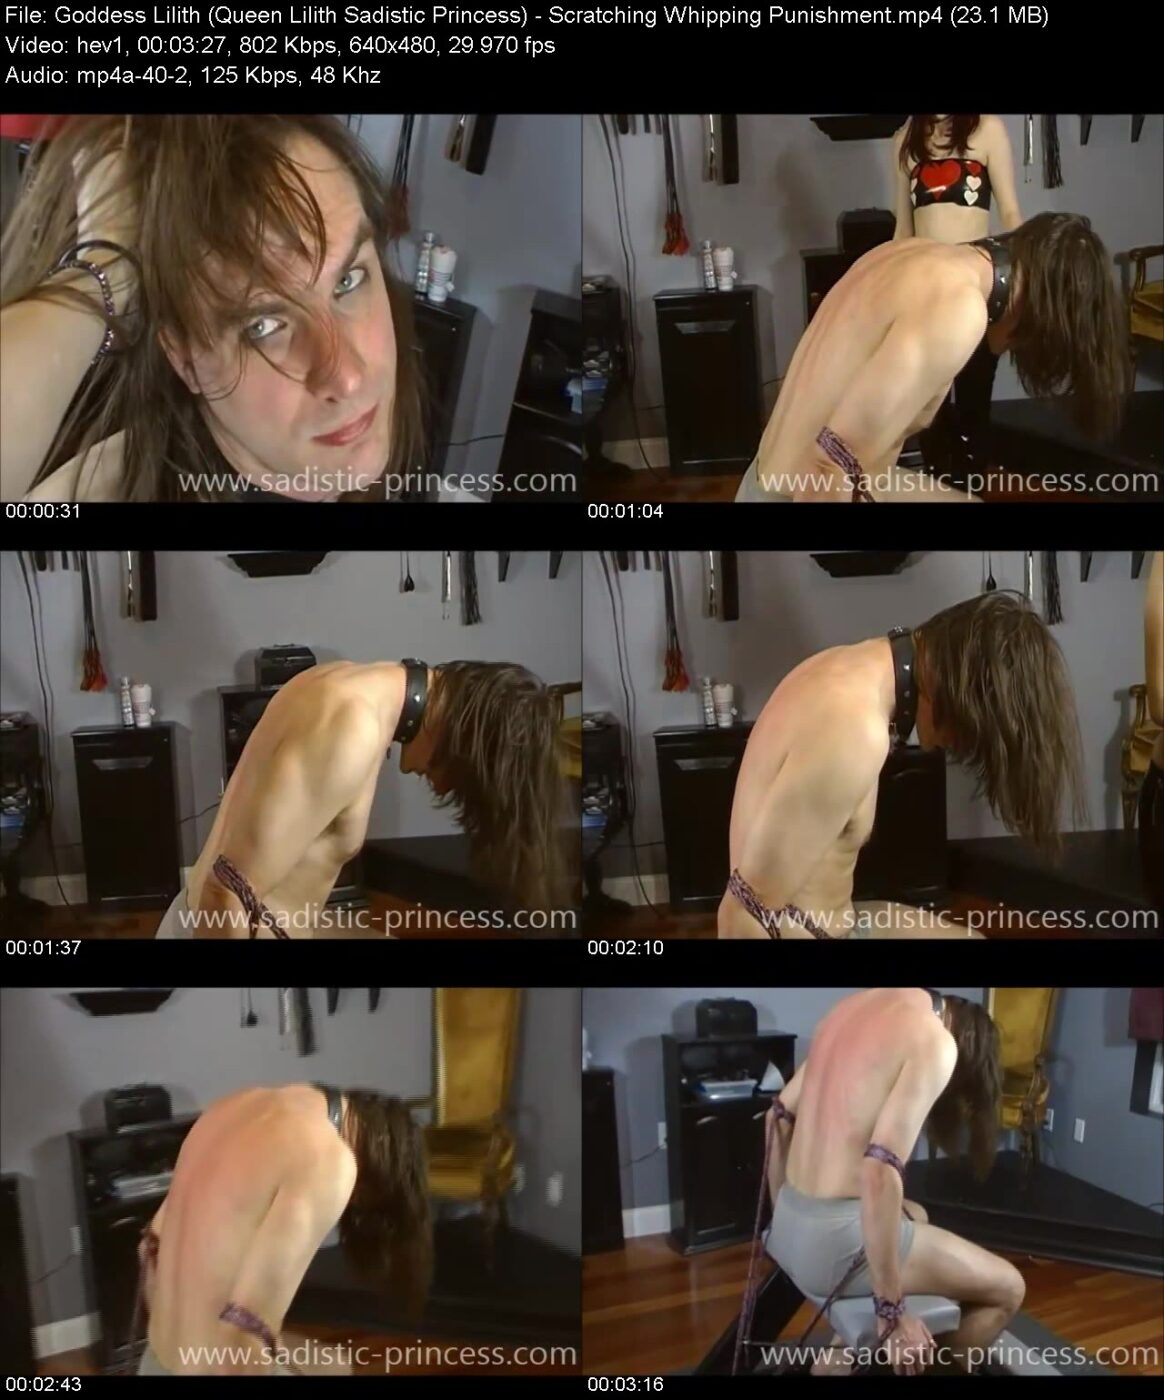 Goddess Lilith (Queen Lilith Sadistic Princess) in Scratching Whipping Punishment